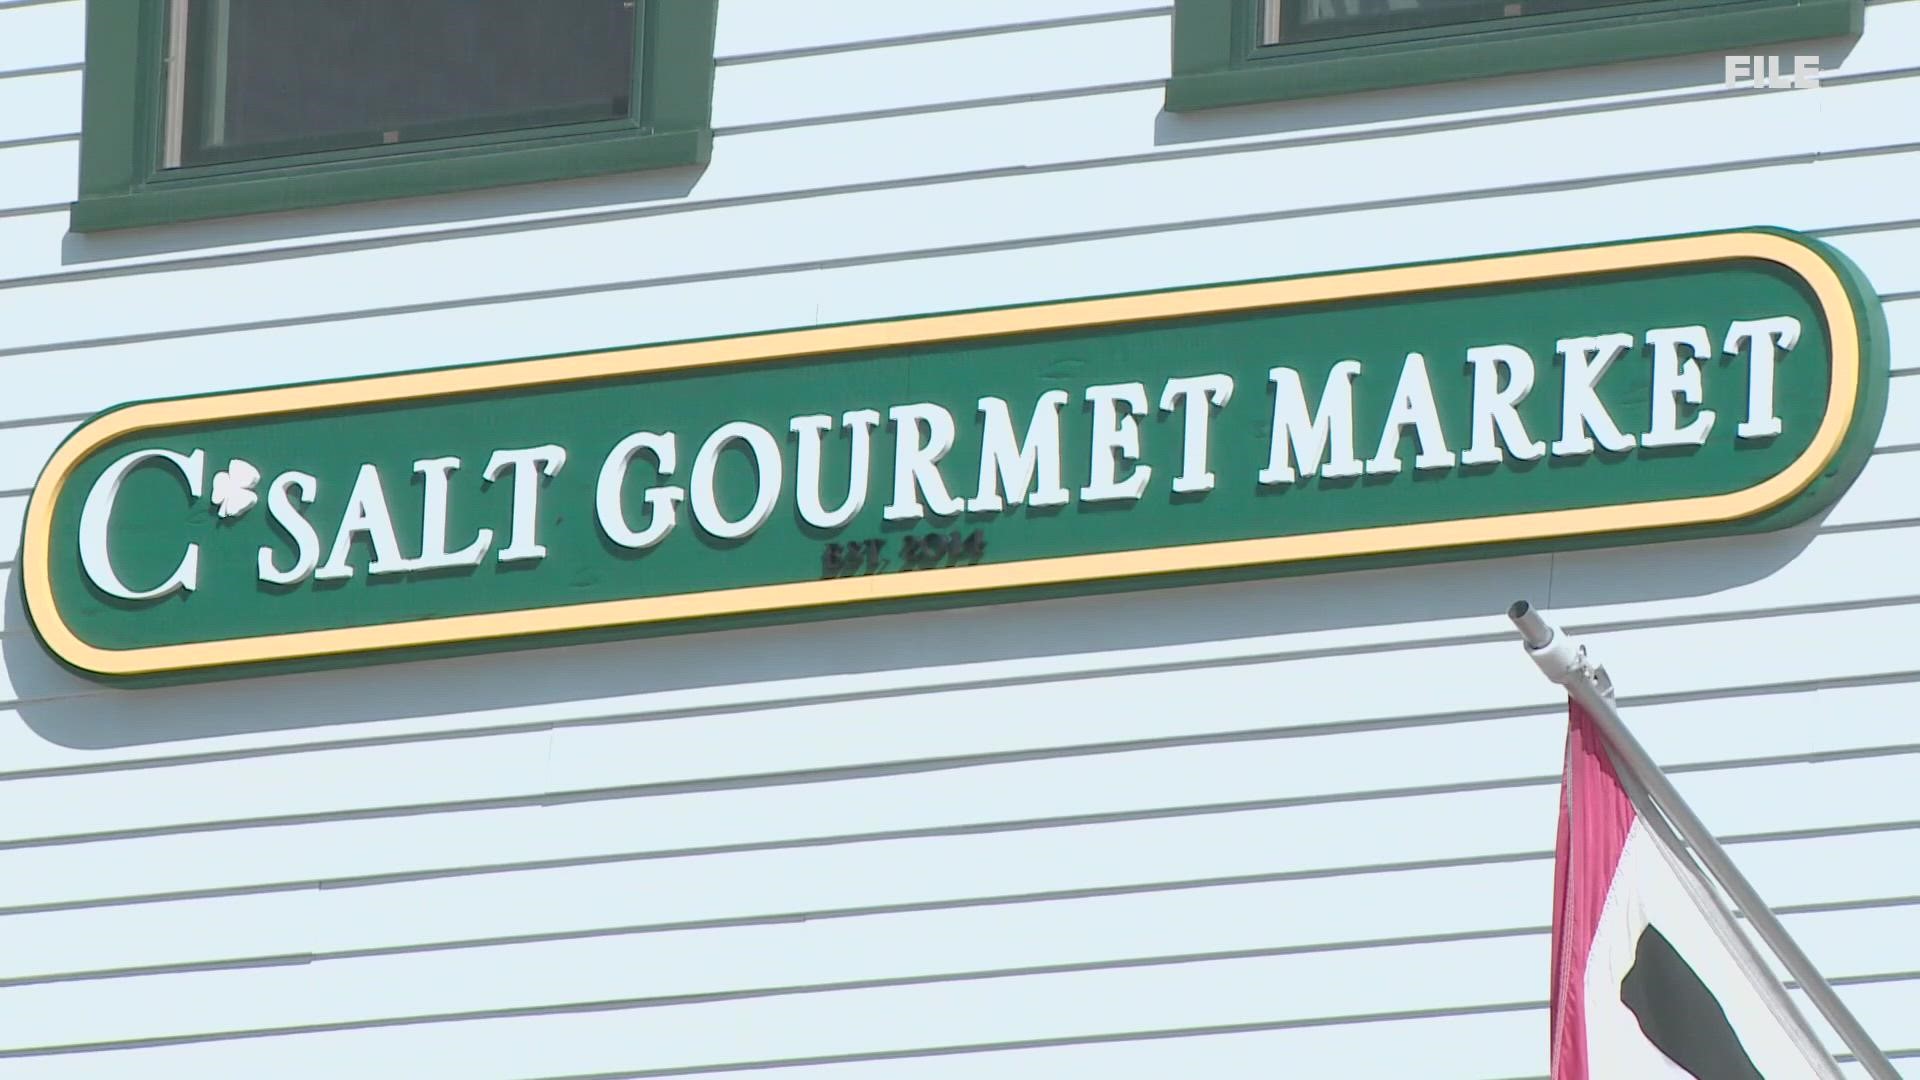 The U.S. Dept. of Labor said it recovered $36,106 in back wages and liquidated damages from C Salt Gourmet Market during its investigation.